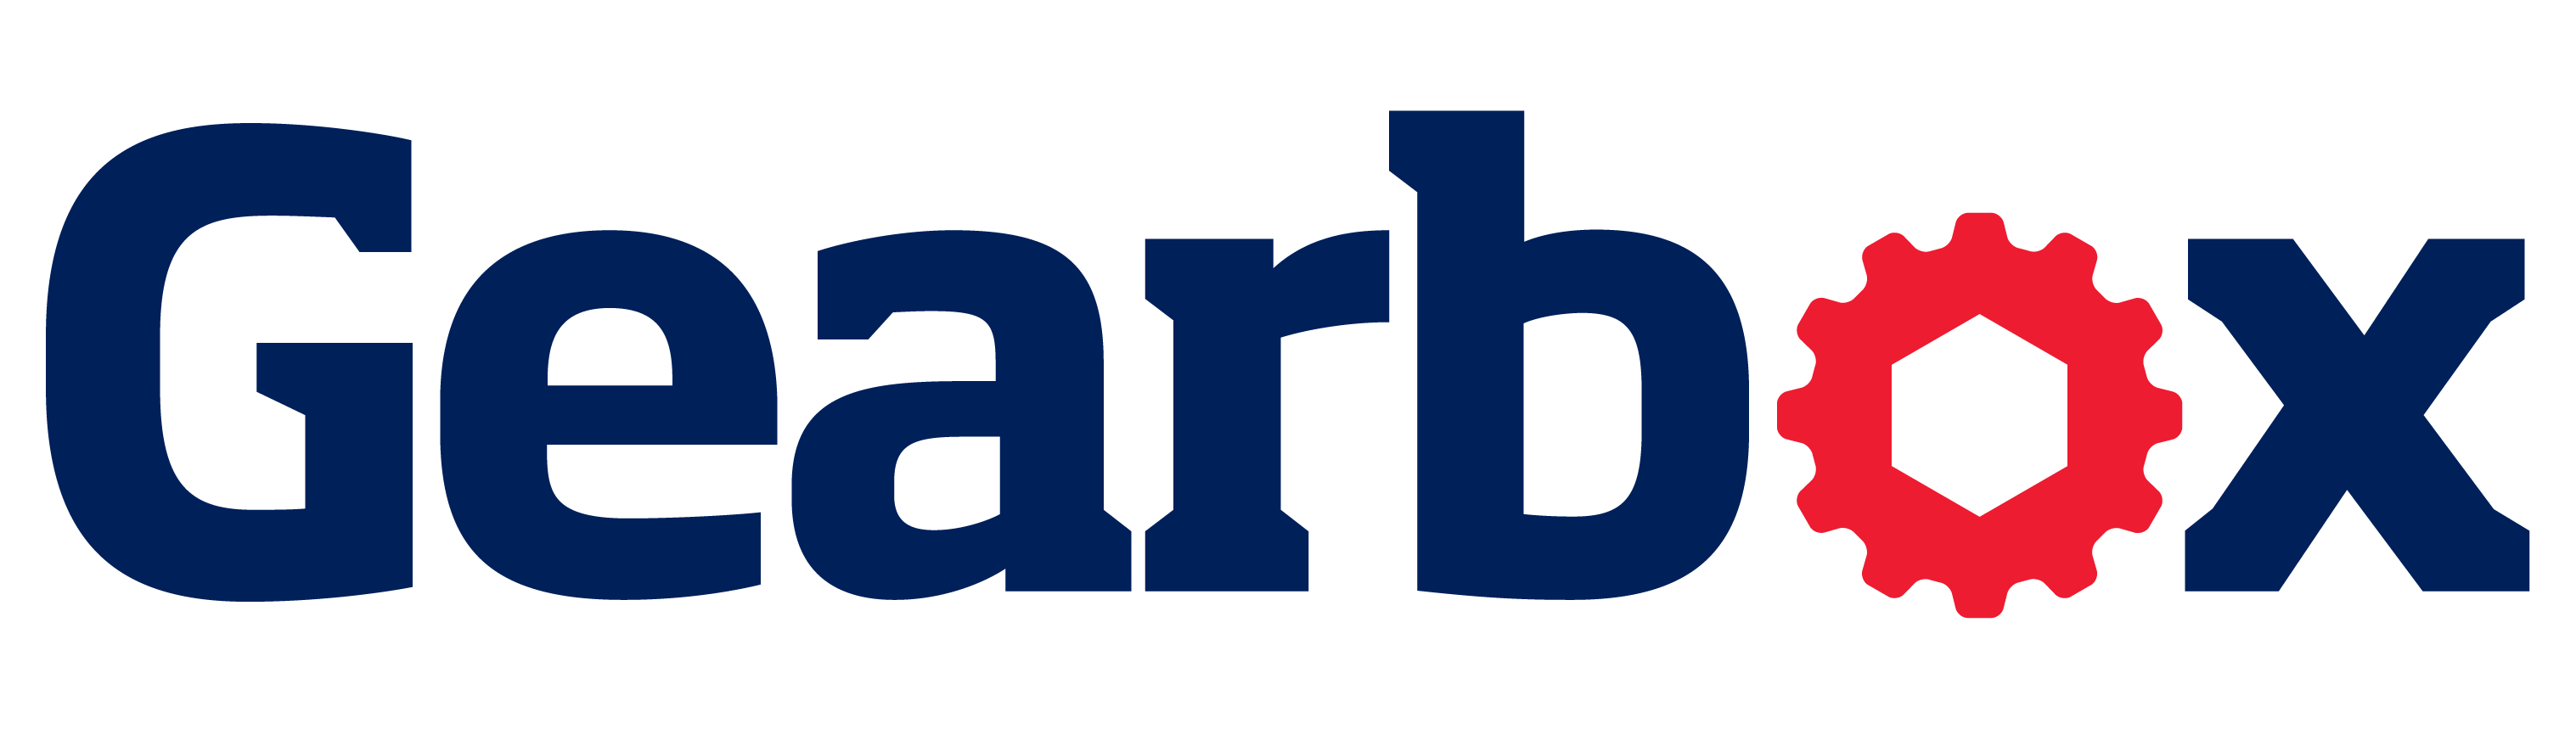 Gearbox Logo - Gearbox Group | Quality OE & Aftermarket Auto Parts